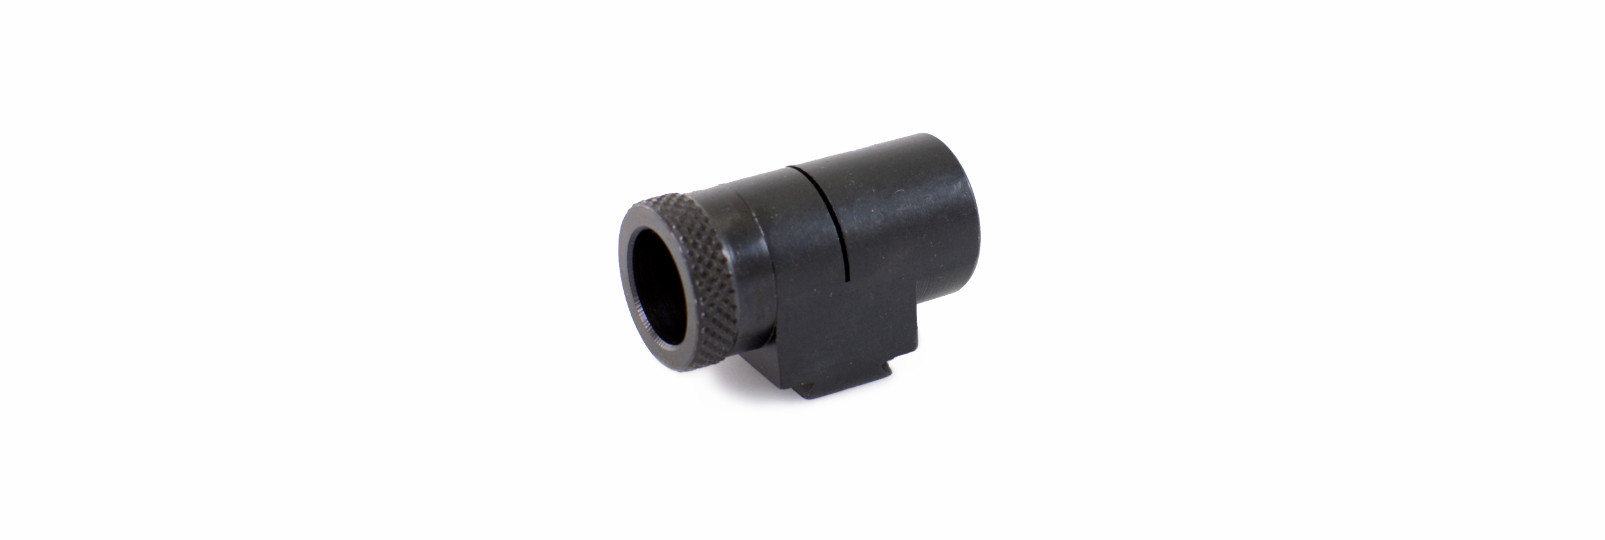 Tunnel sight  for muzzle-loading guns with 18 inserts...